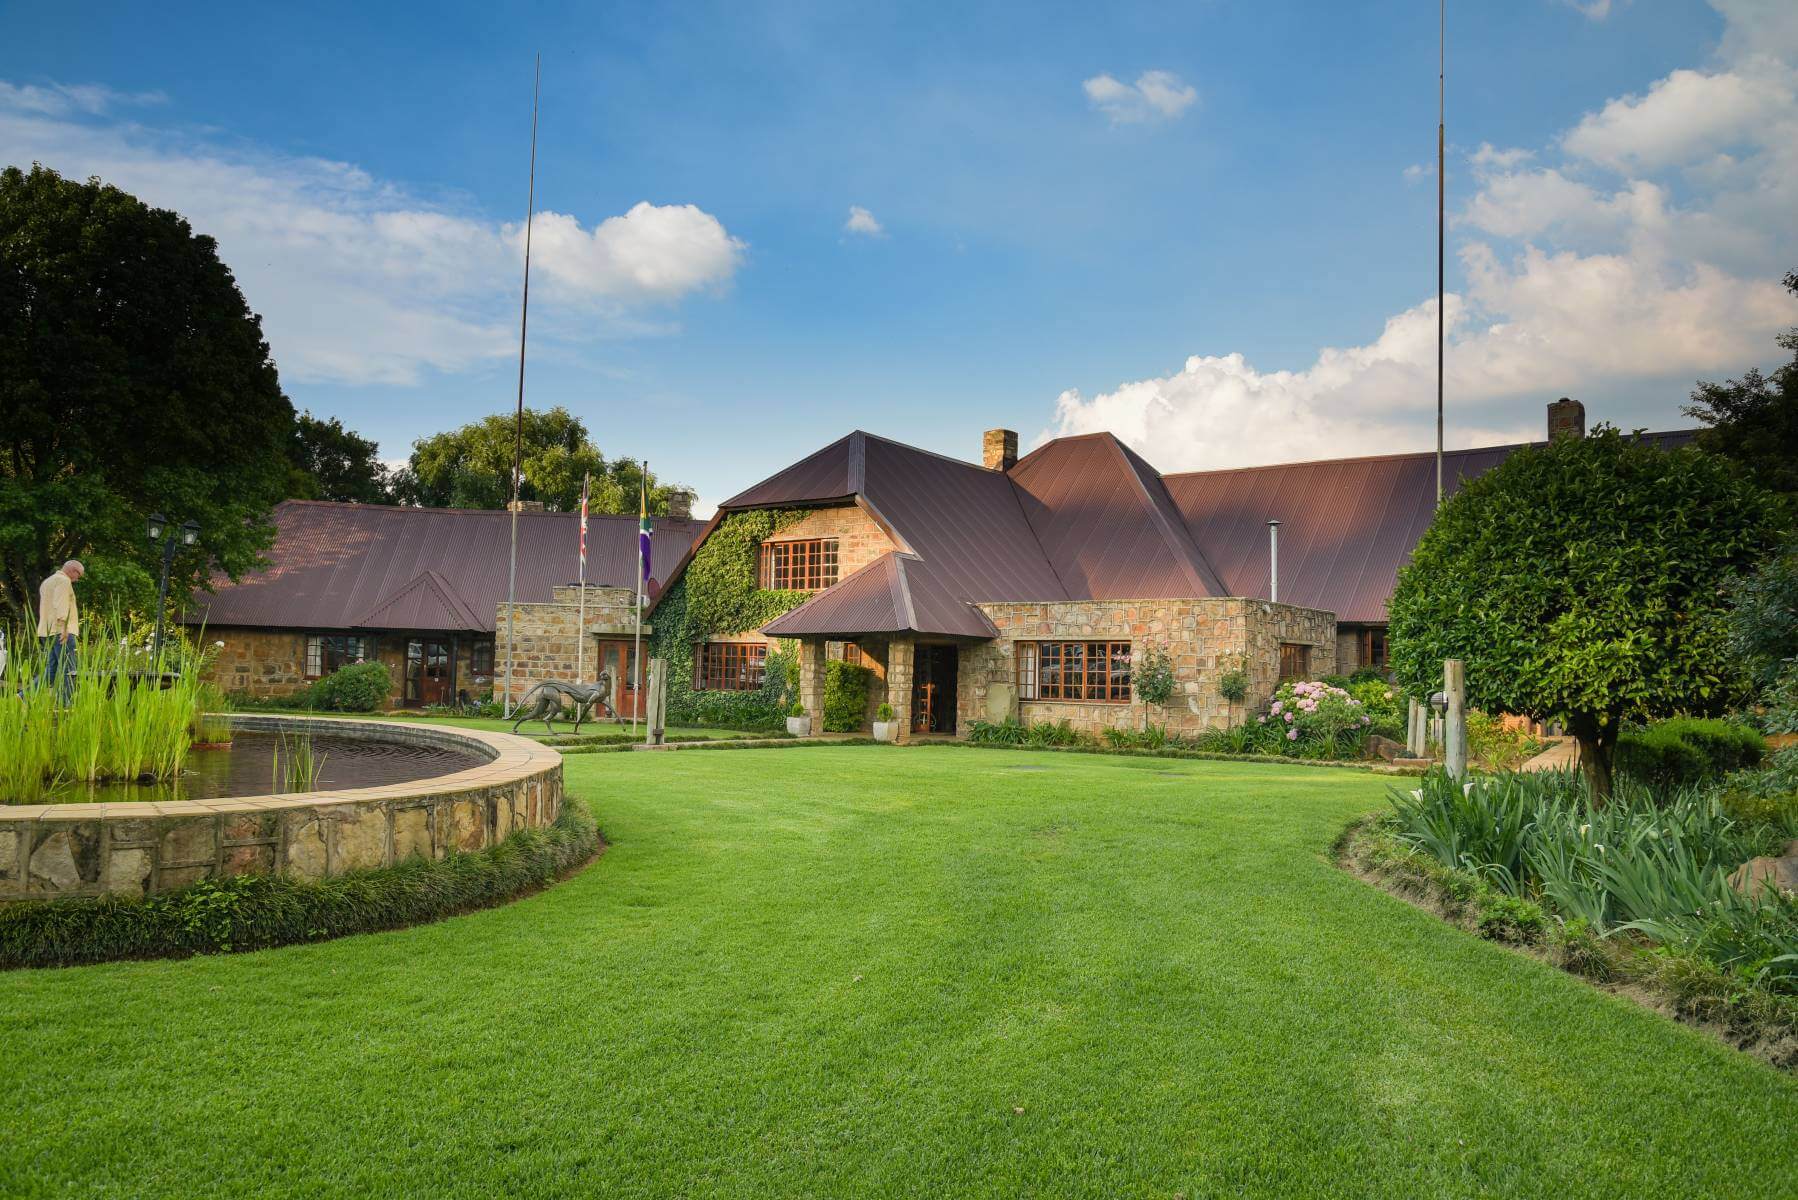 WALKERSONS HOTEL & SPA JOINS LUXURY SAFARI MAGAZINE AS A NEW PLATINUM PARTNER